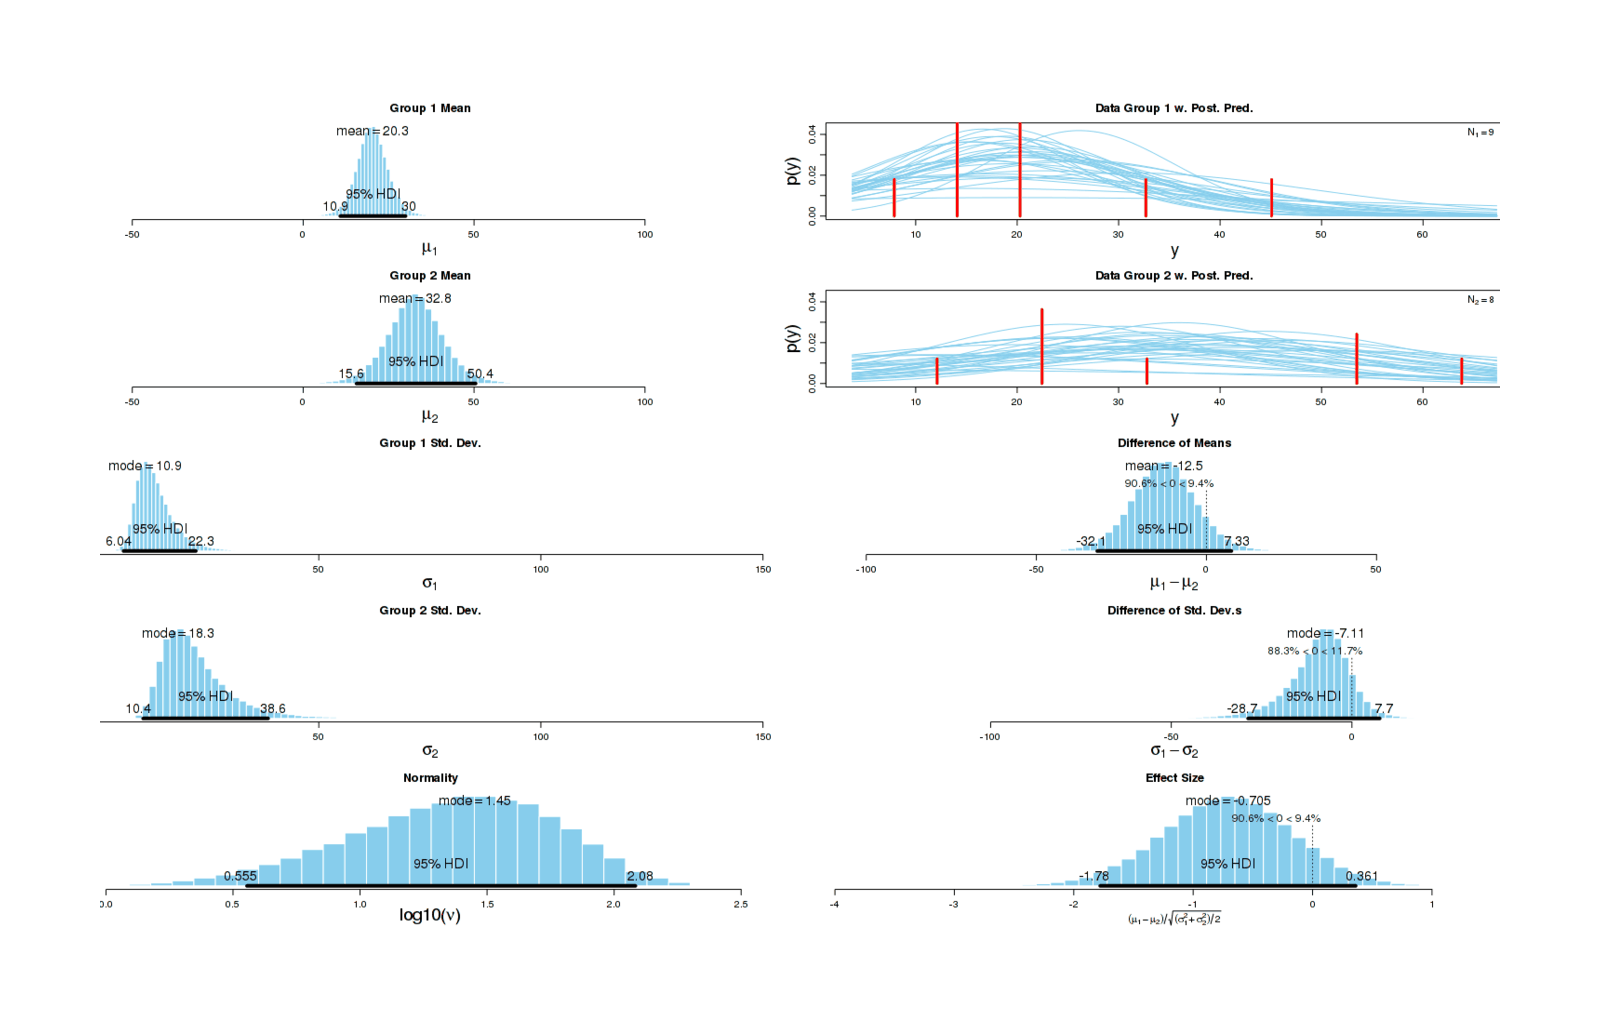 Graphical summary of BEST results for dataset with Yvain replaced by a mean